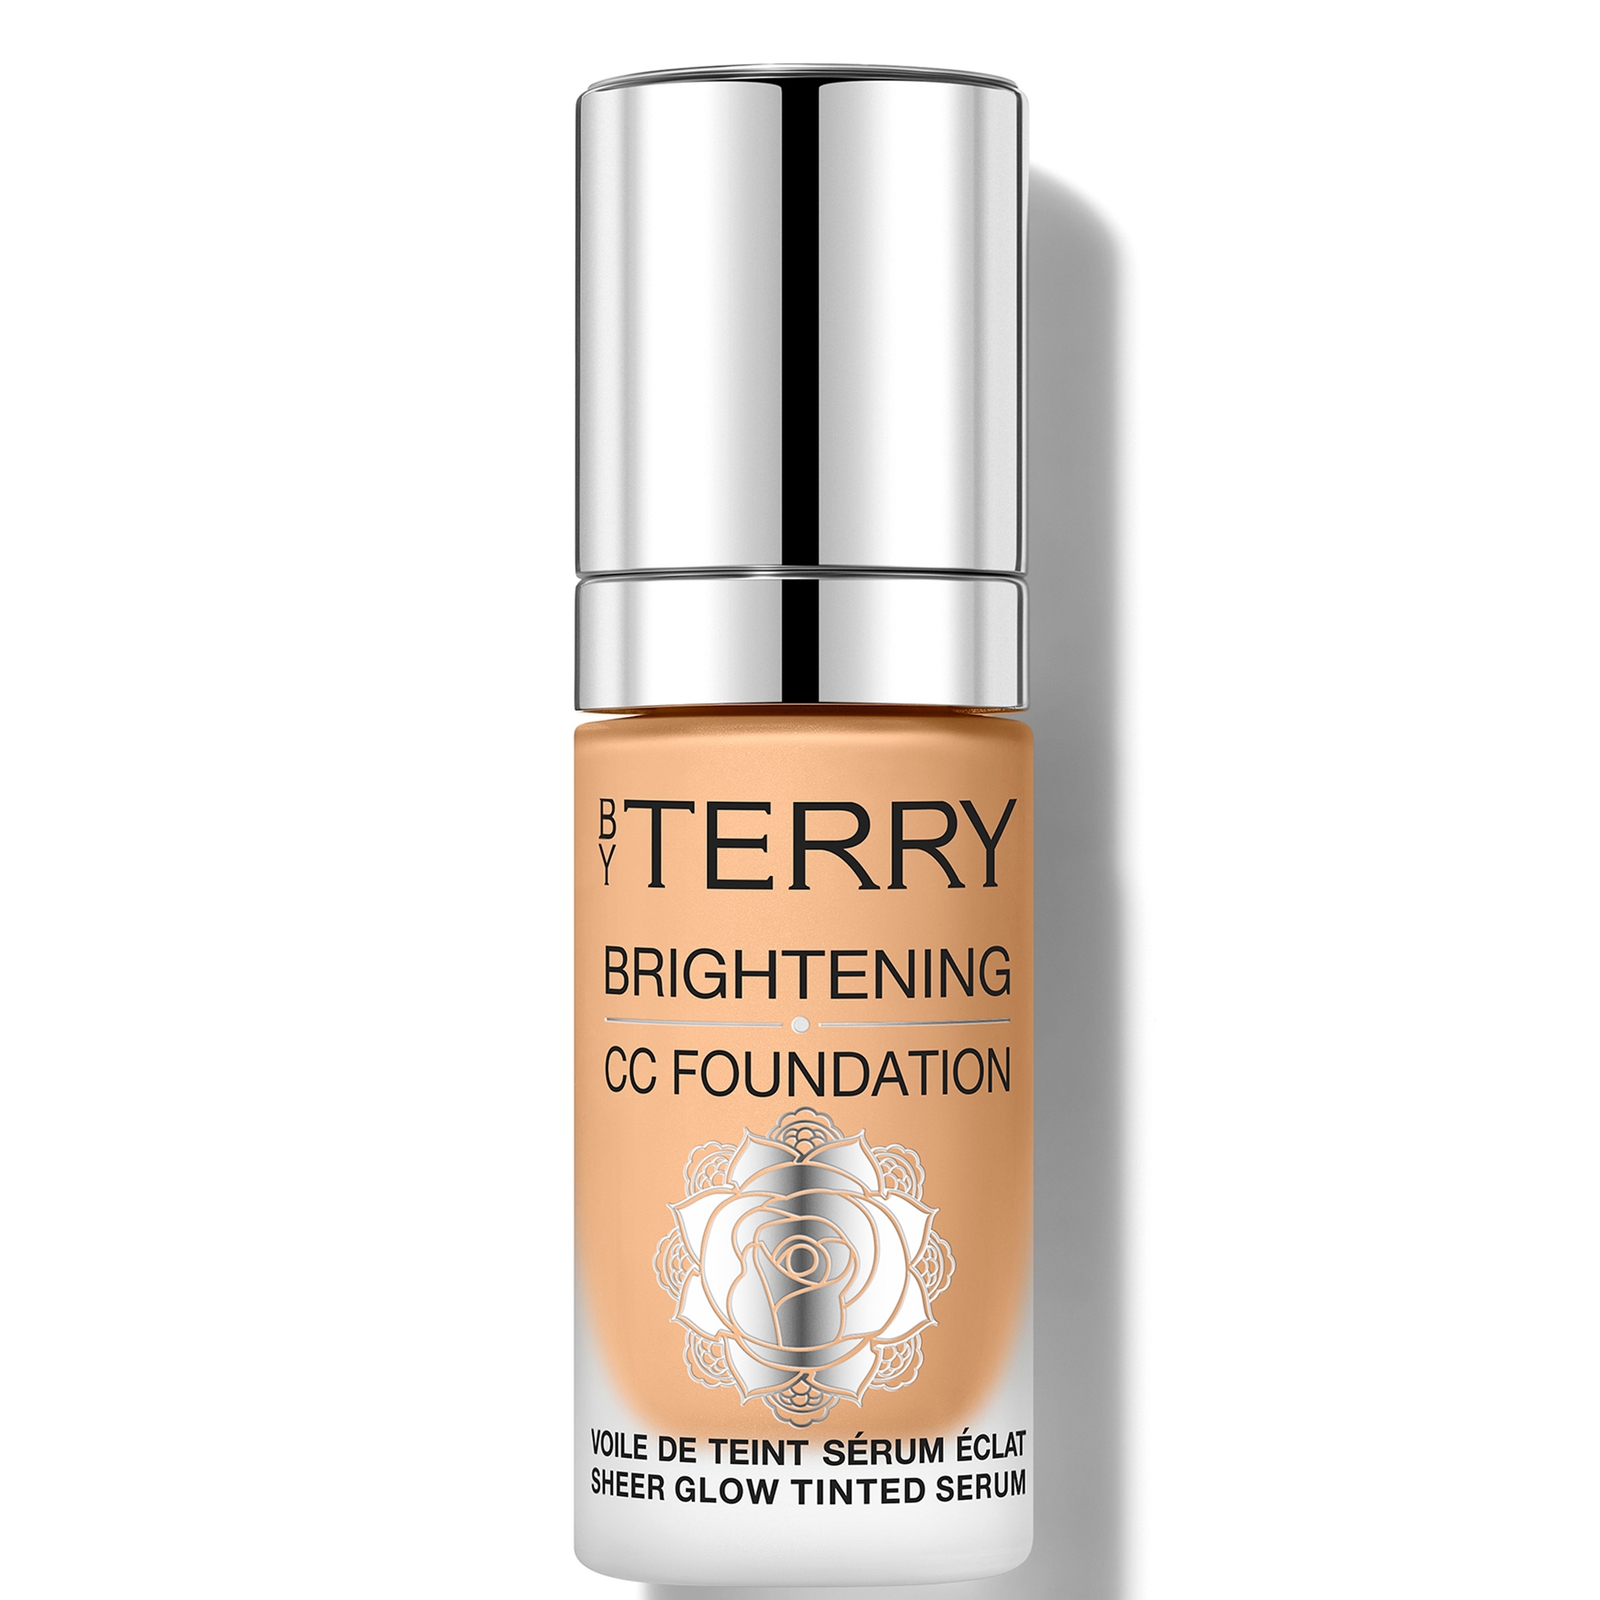 By Terry Brightening Cc Foundation 30ml (various Shades) - 5c - Medium Tan Cool In White